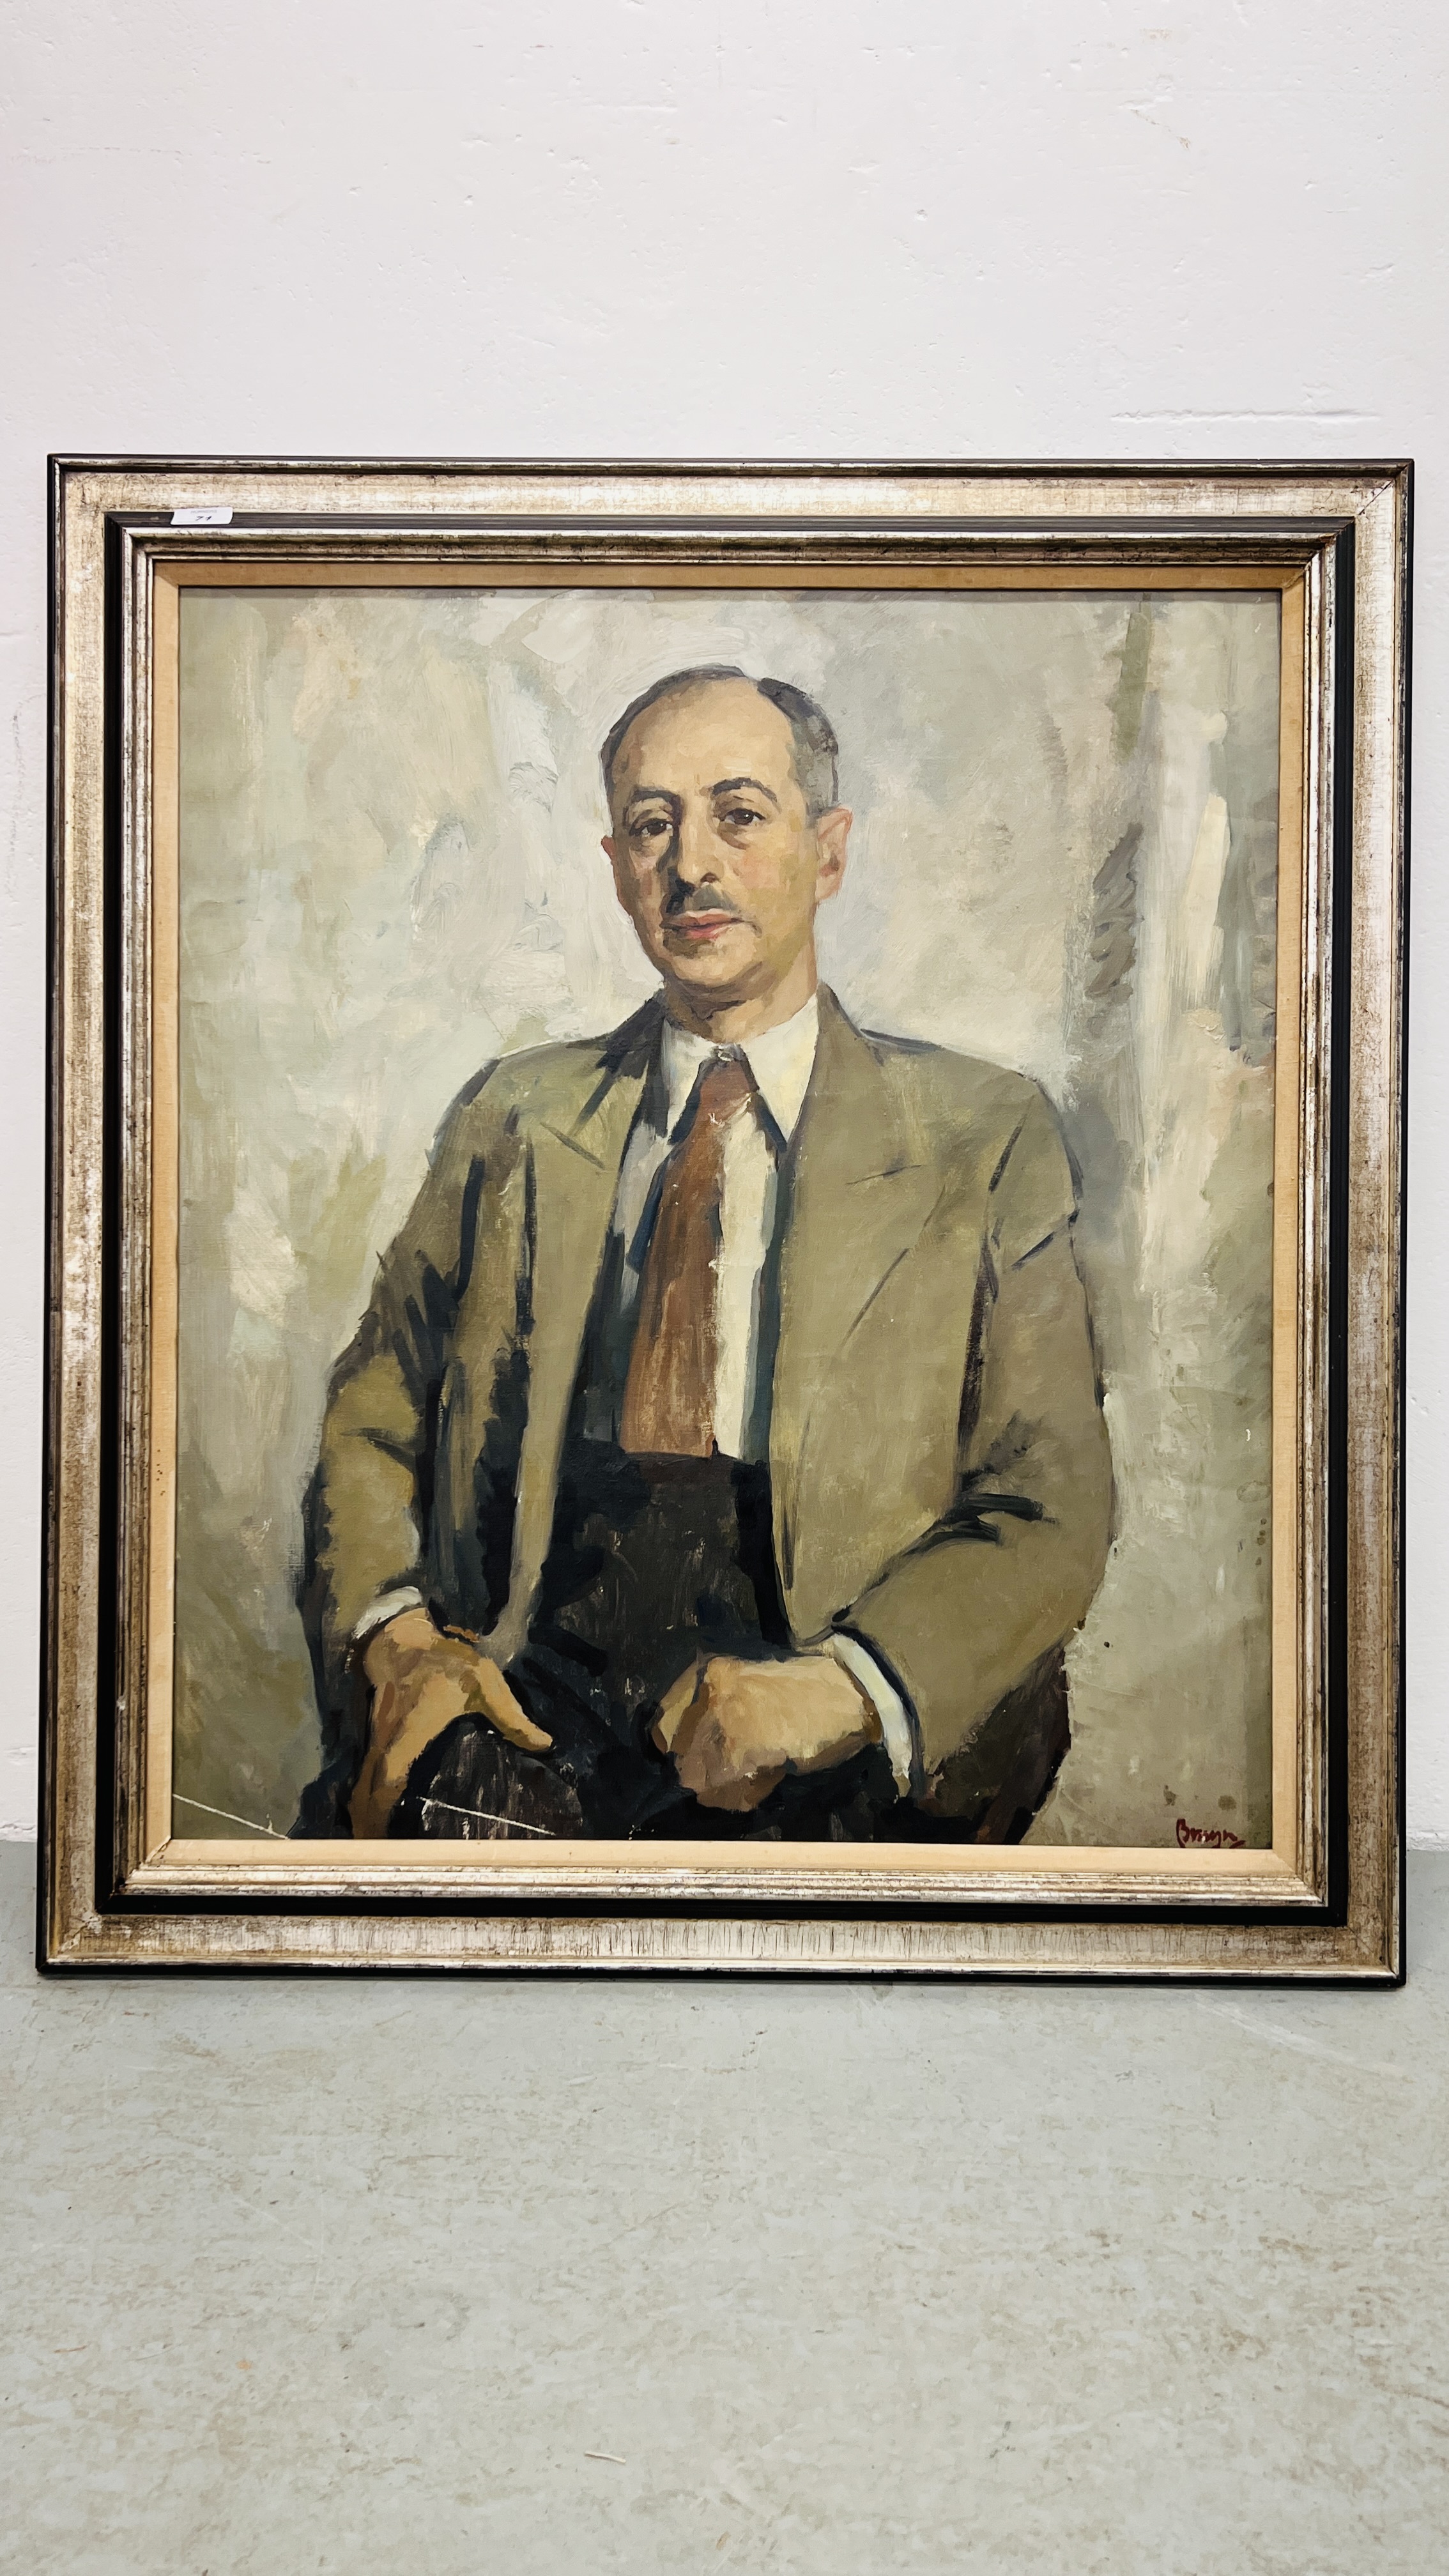 OIL ON CANVAS - PORTRAIT OF GENTLEMAN BEARING INDISTINCT SIGNATURE POSSIBLY JACOB BRUYN 84 X 73CM. - Image 2 of 7